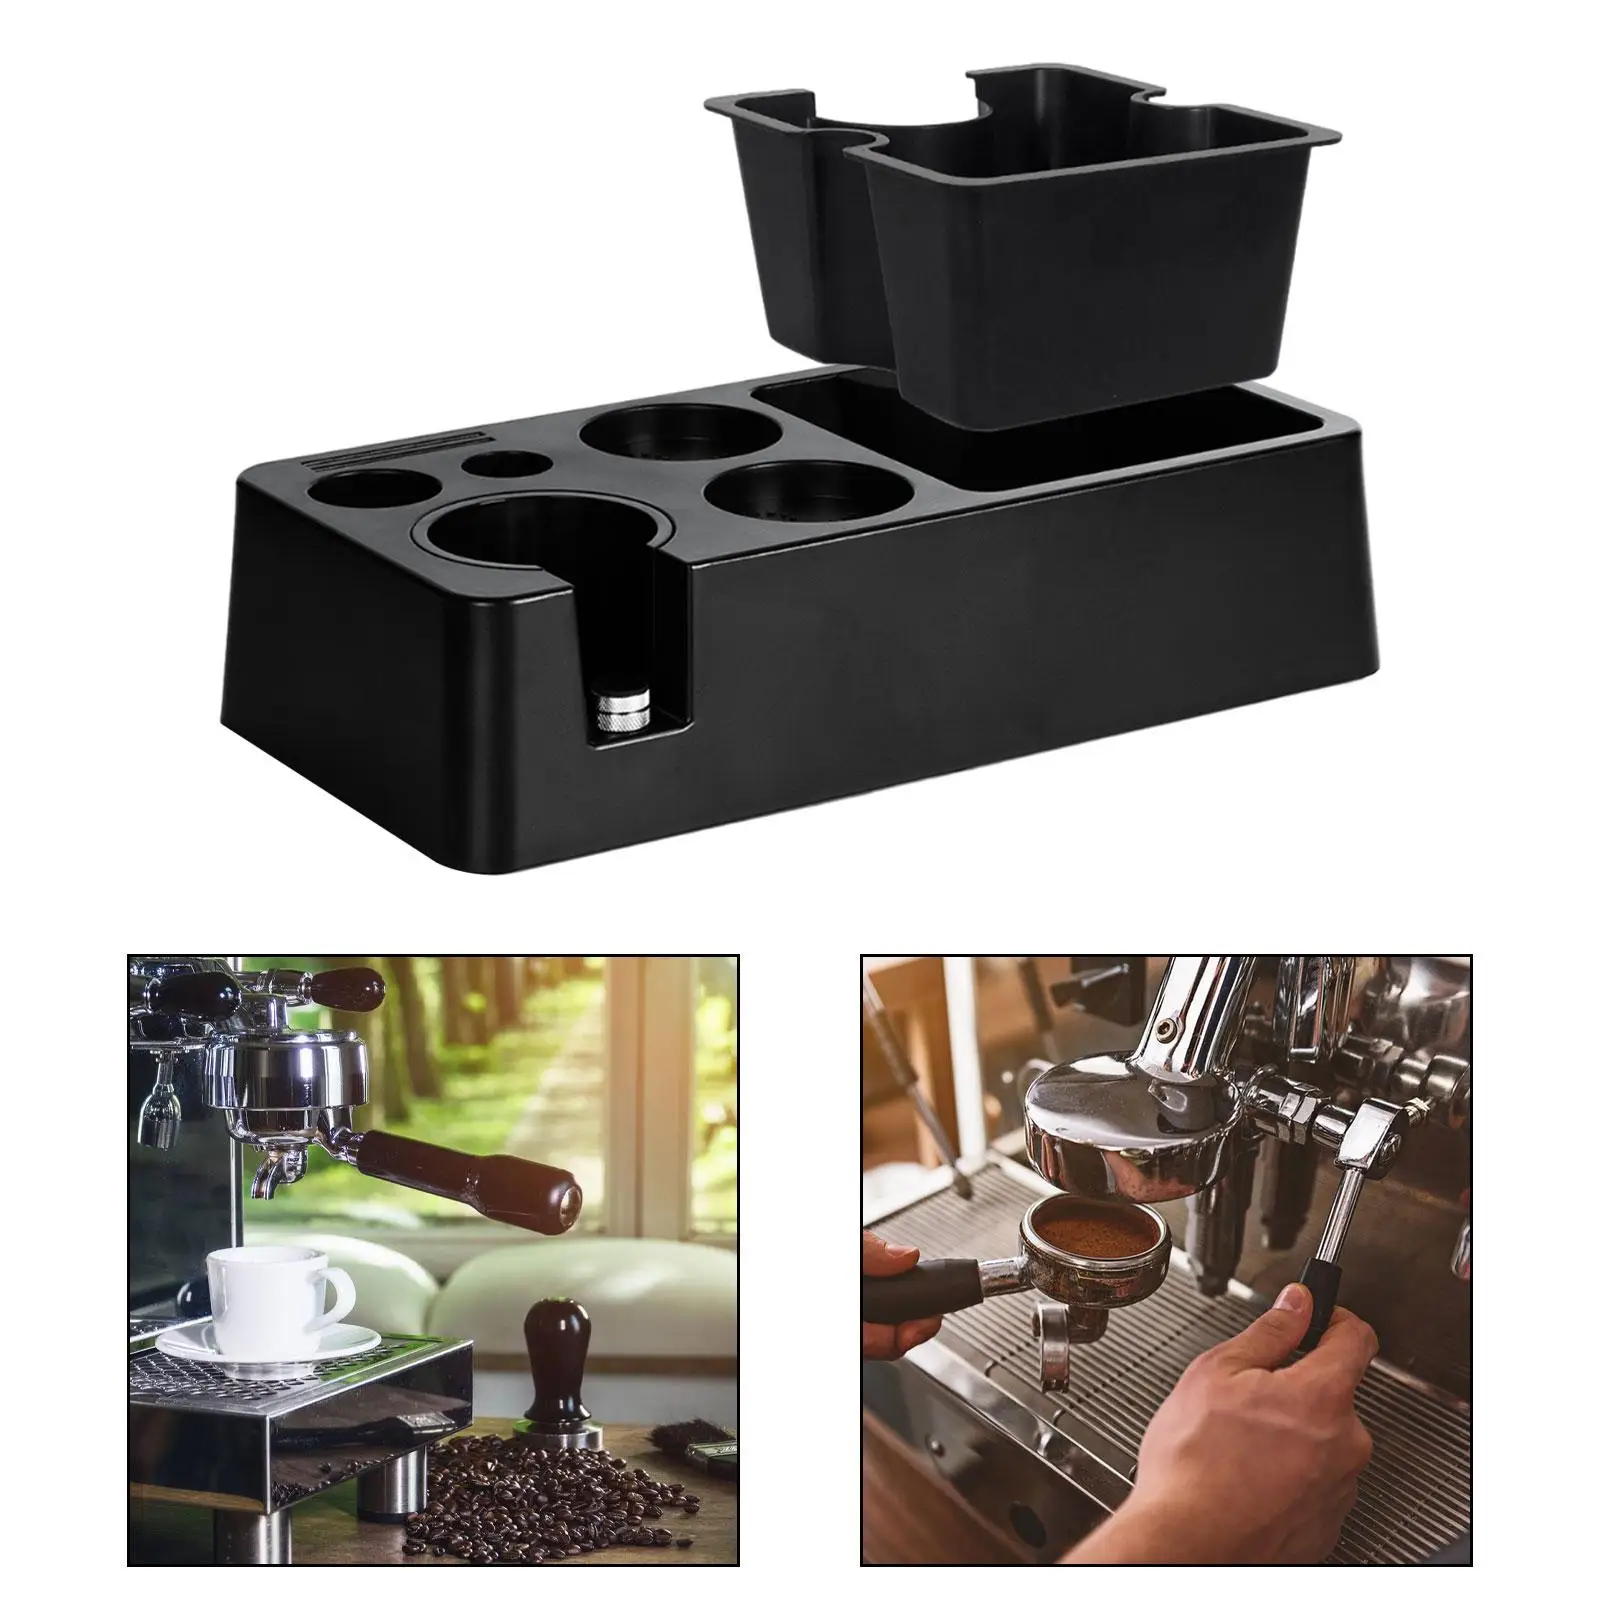 Coffee Tamper Stand and Portafilter Holder Multifunctional Espresso Knock Box for Cafe Coffee Bar Kitchen Counters Barista Tool